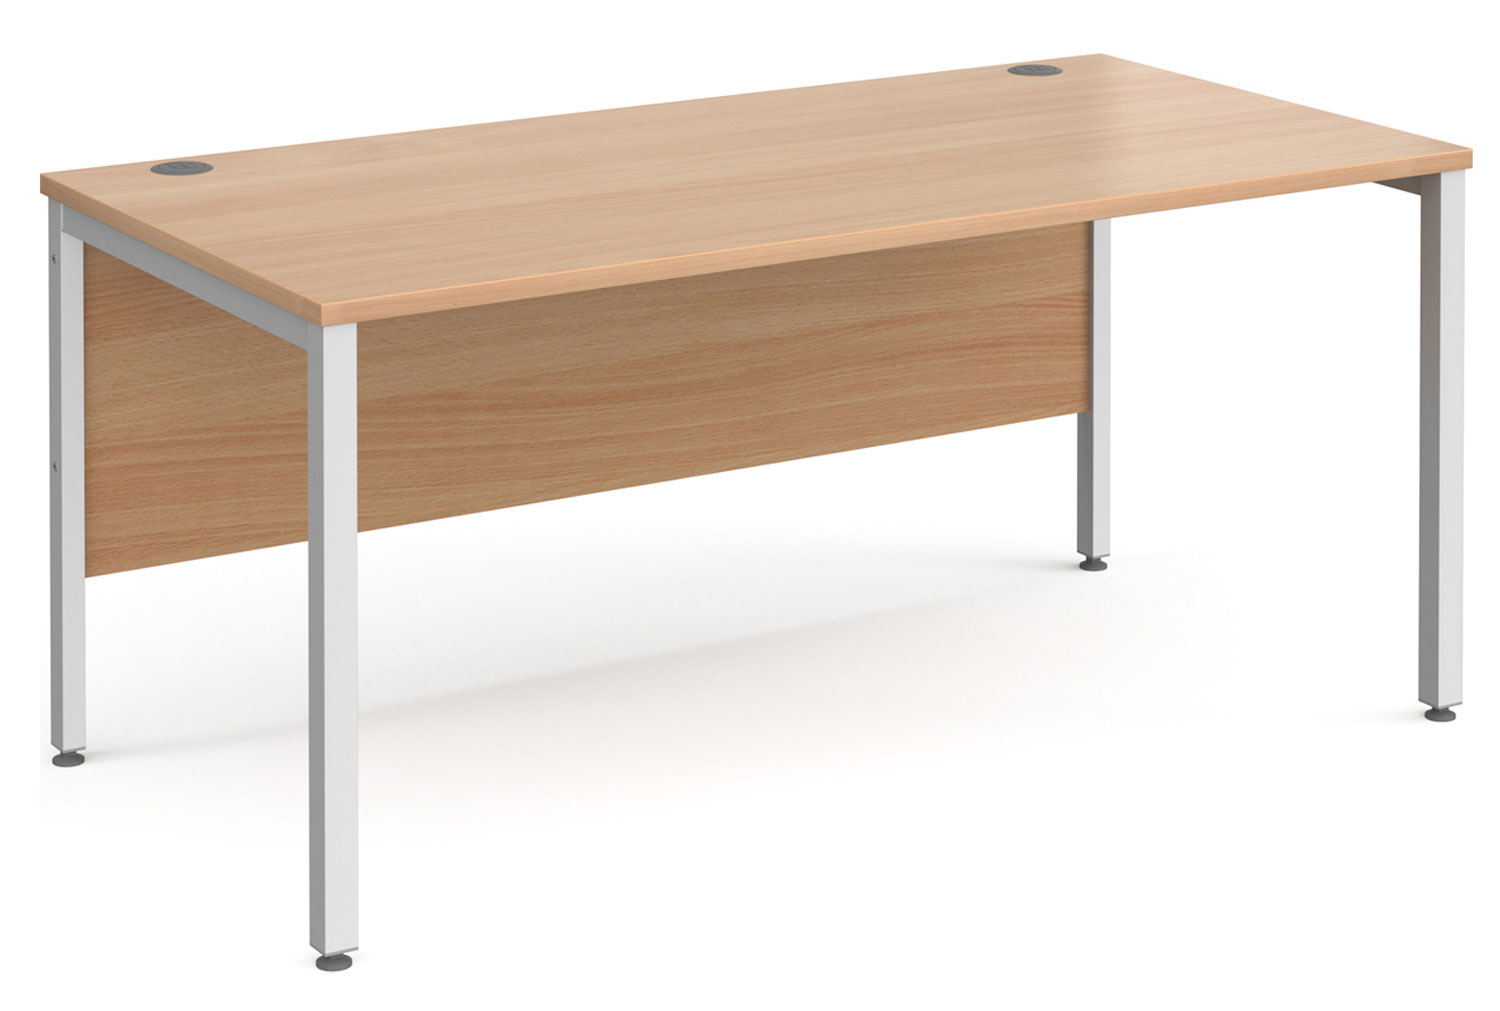 Tully Bench Rectangular Office Desk 160wx80dx73h (cm), Beech, Express Delivery